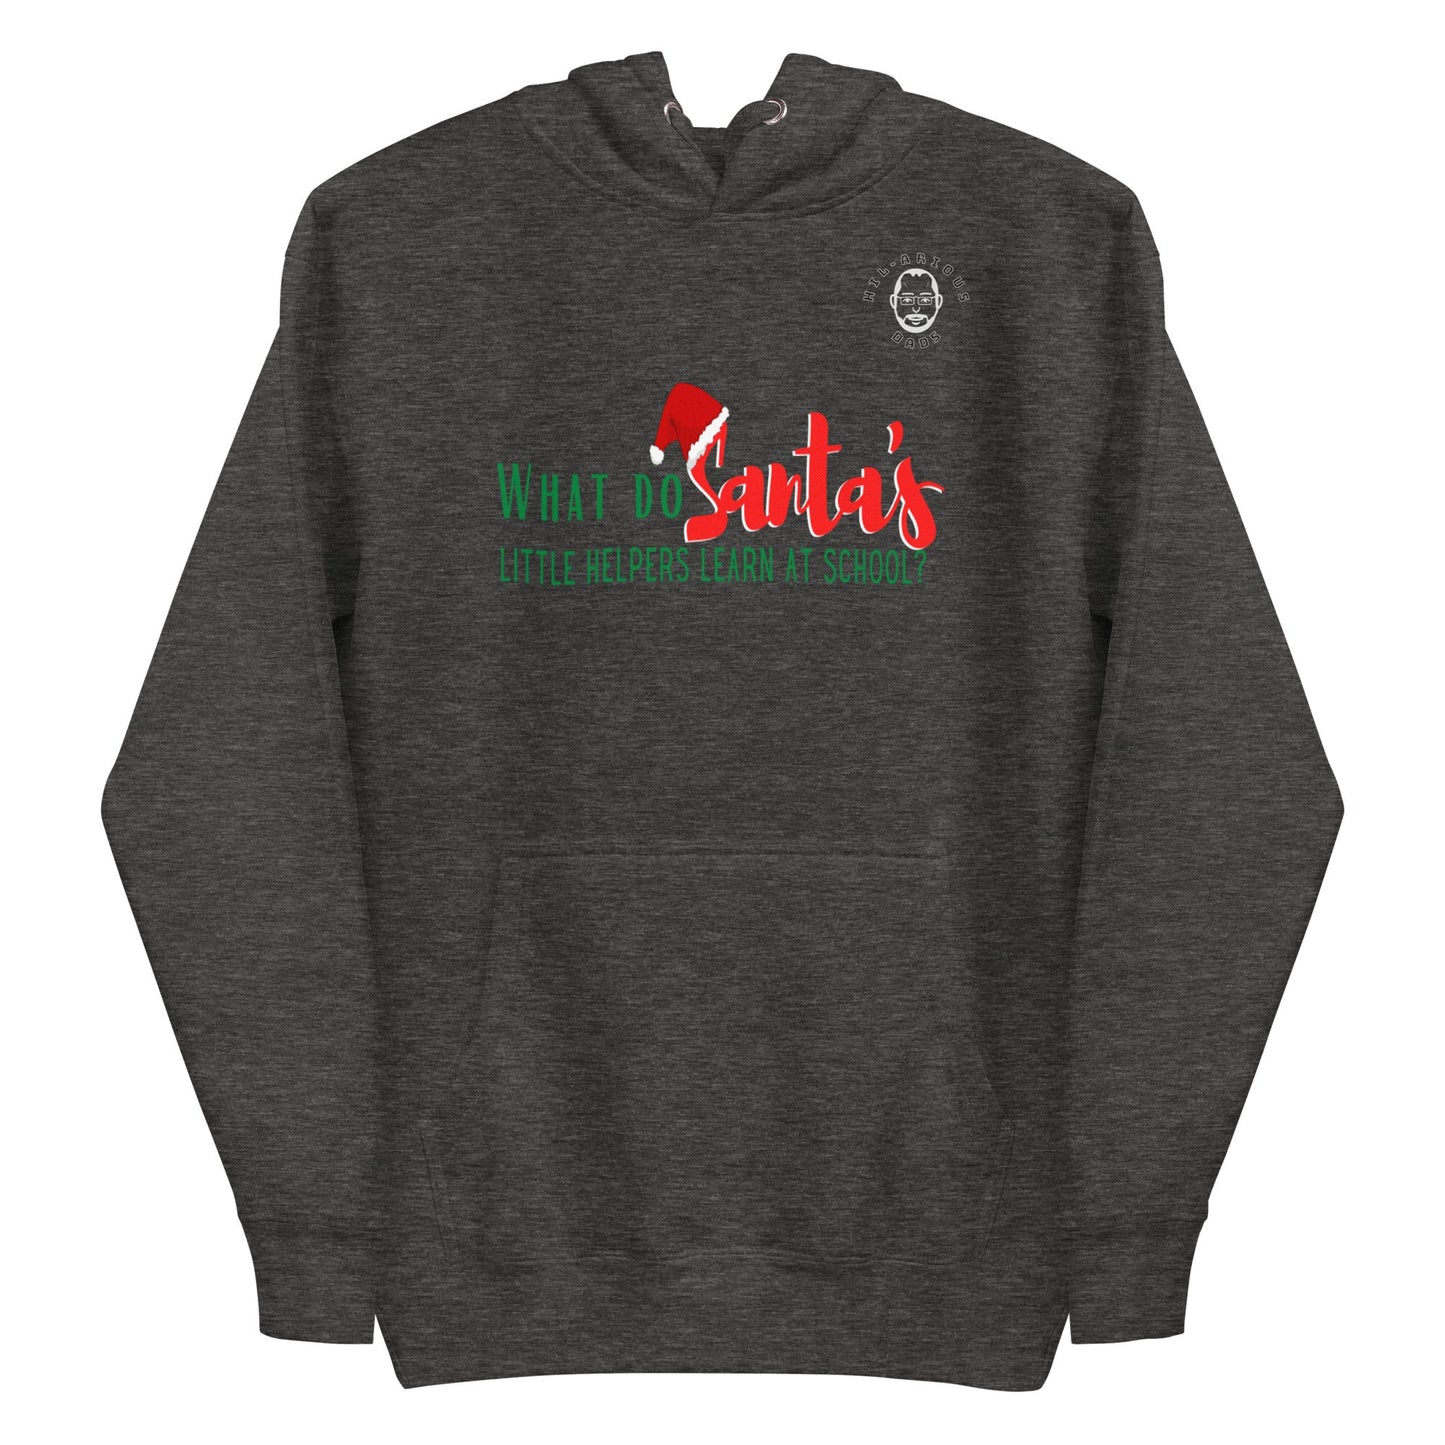 What do Santa’s little helpers learn at school?-Hoodie - Hil-arious Dads